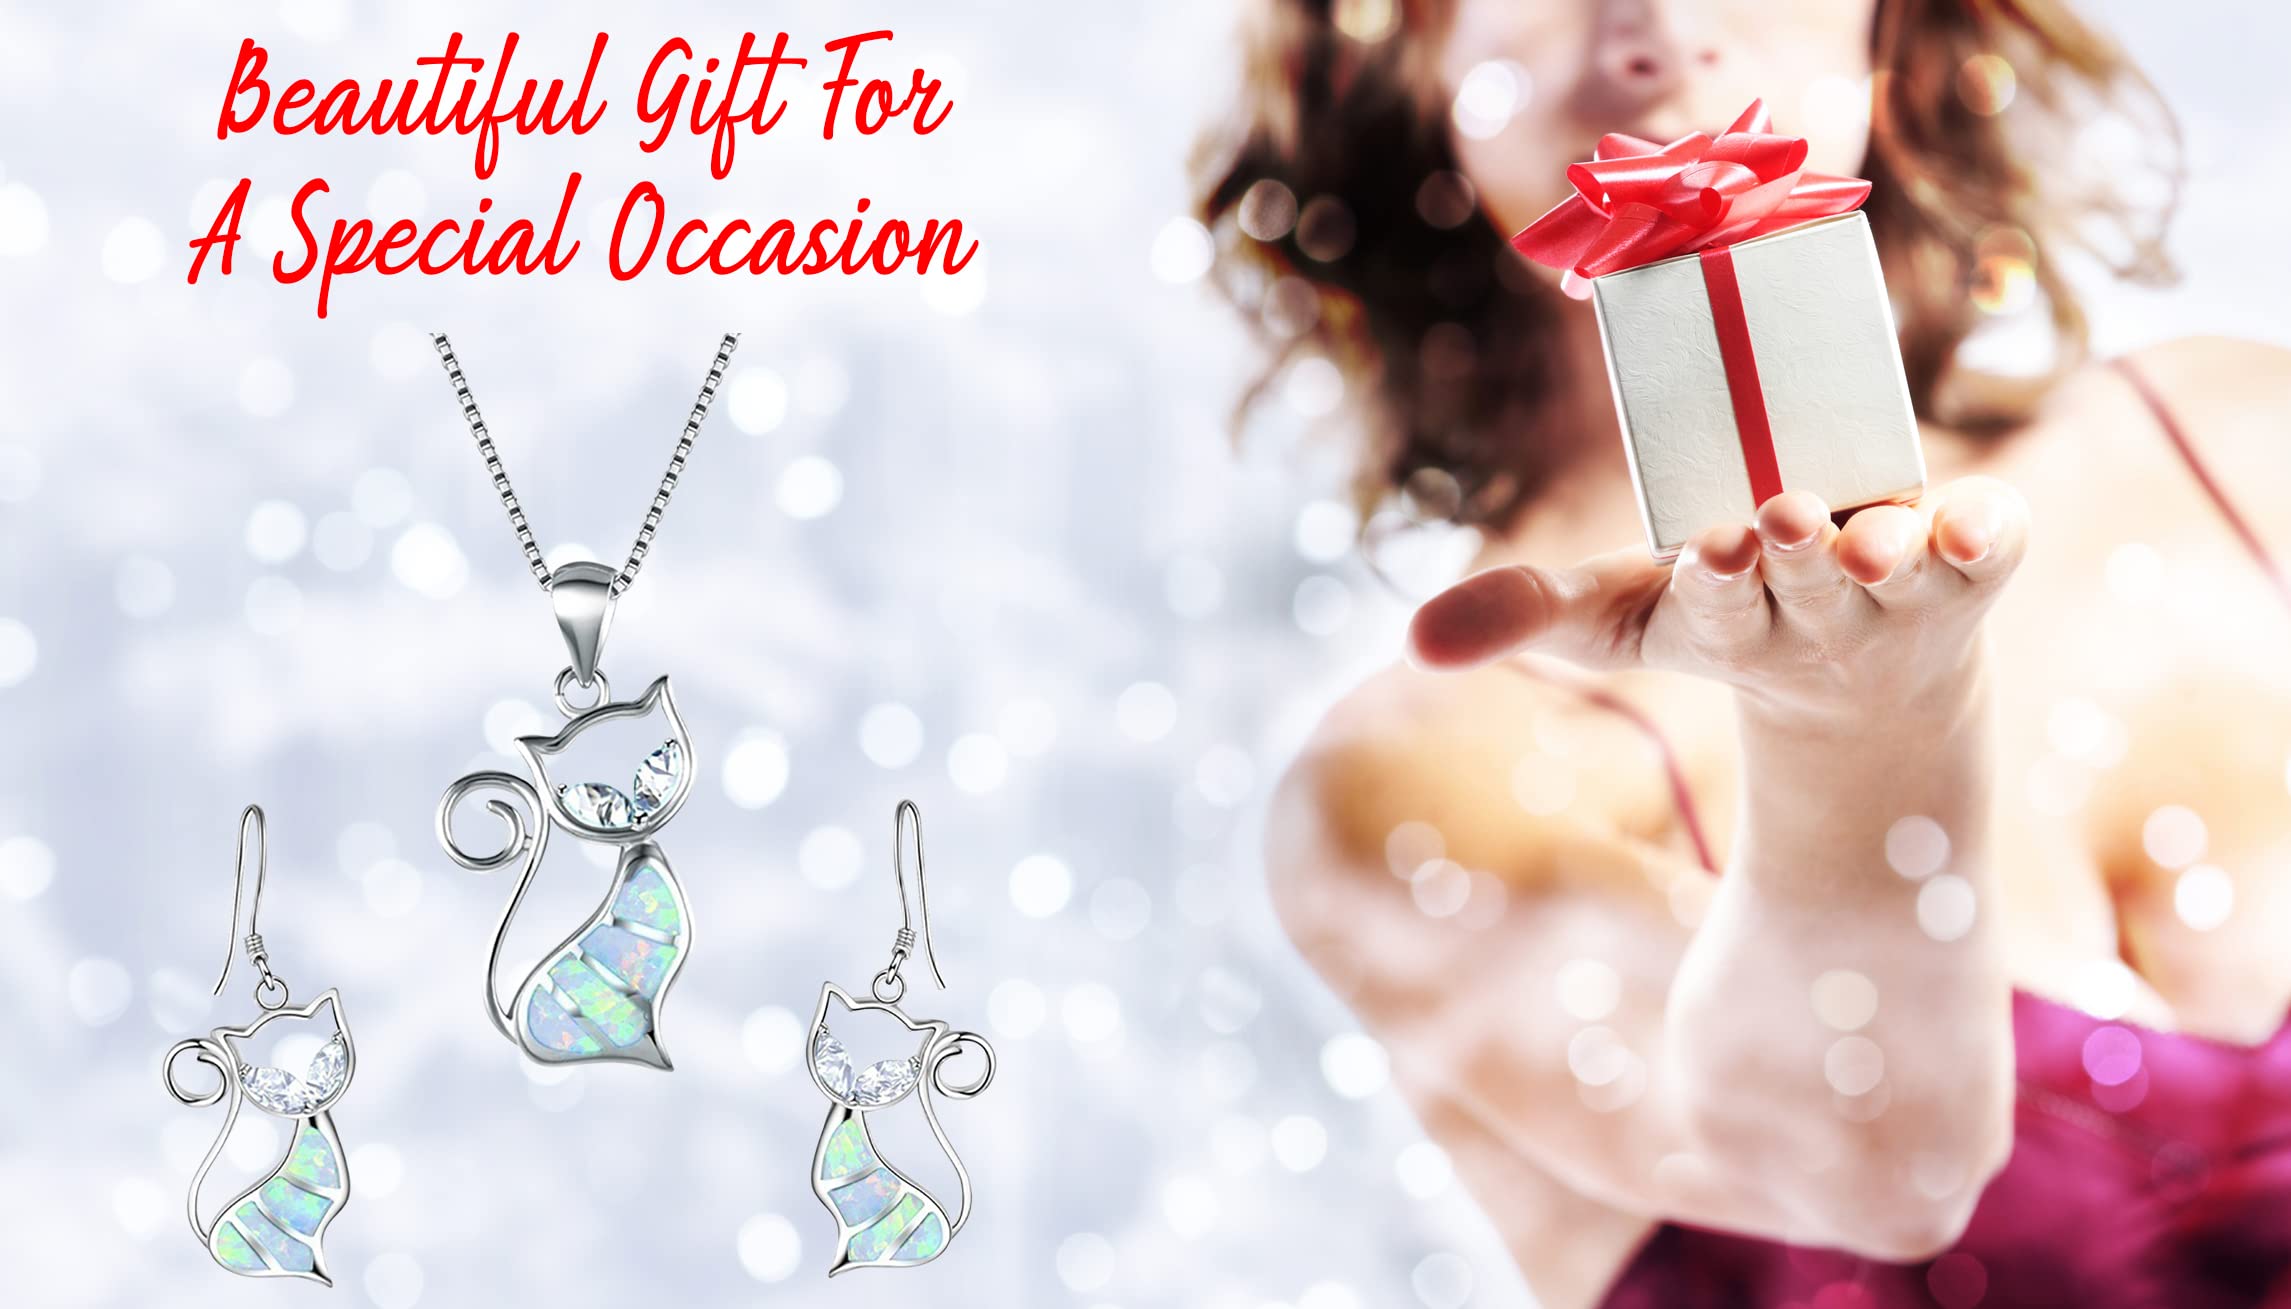 Cute Cat Pendant Necklace &amp; Earrings Matching Set For Women - Ladies Silver Plated Crystal Jewellery with Gift Box